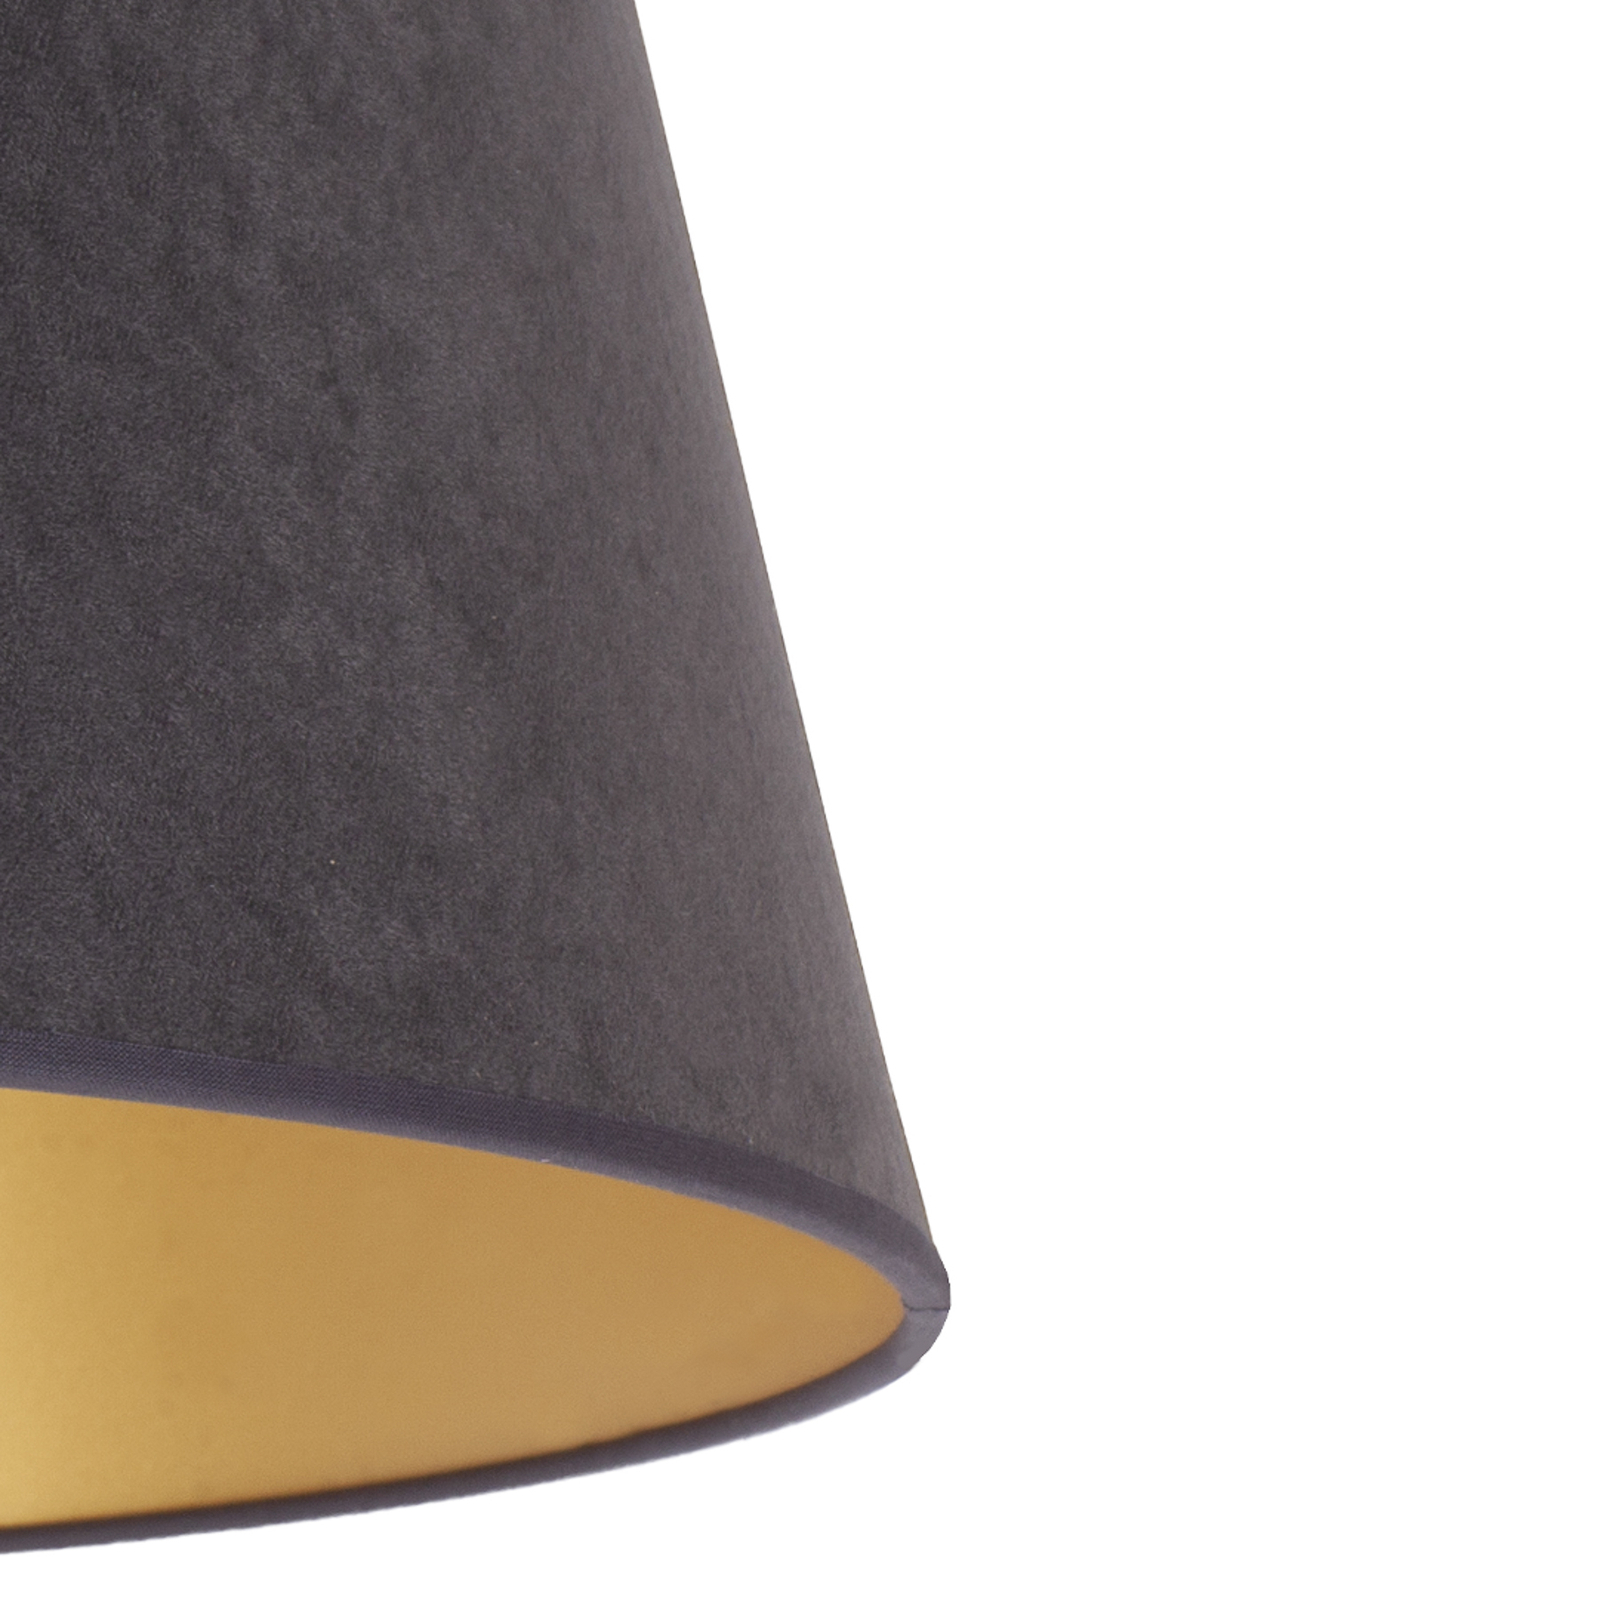 Cone lampshade height 22.5 cm, graphite/gold